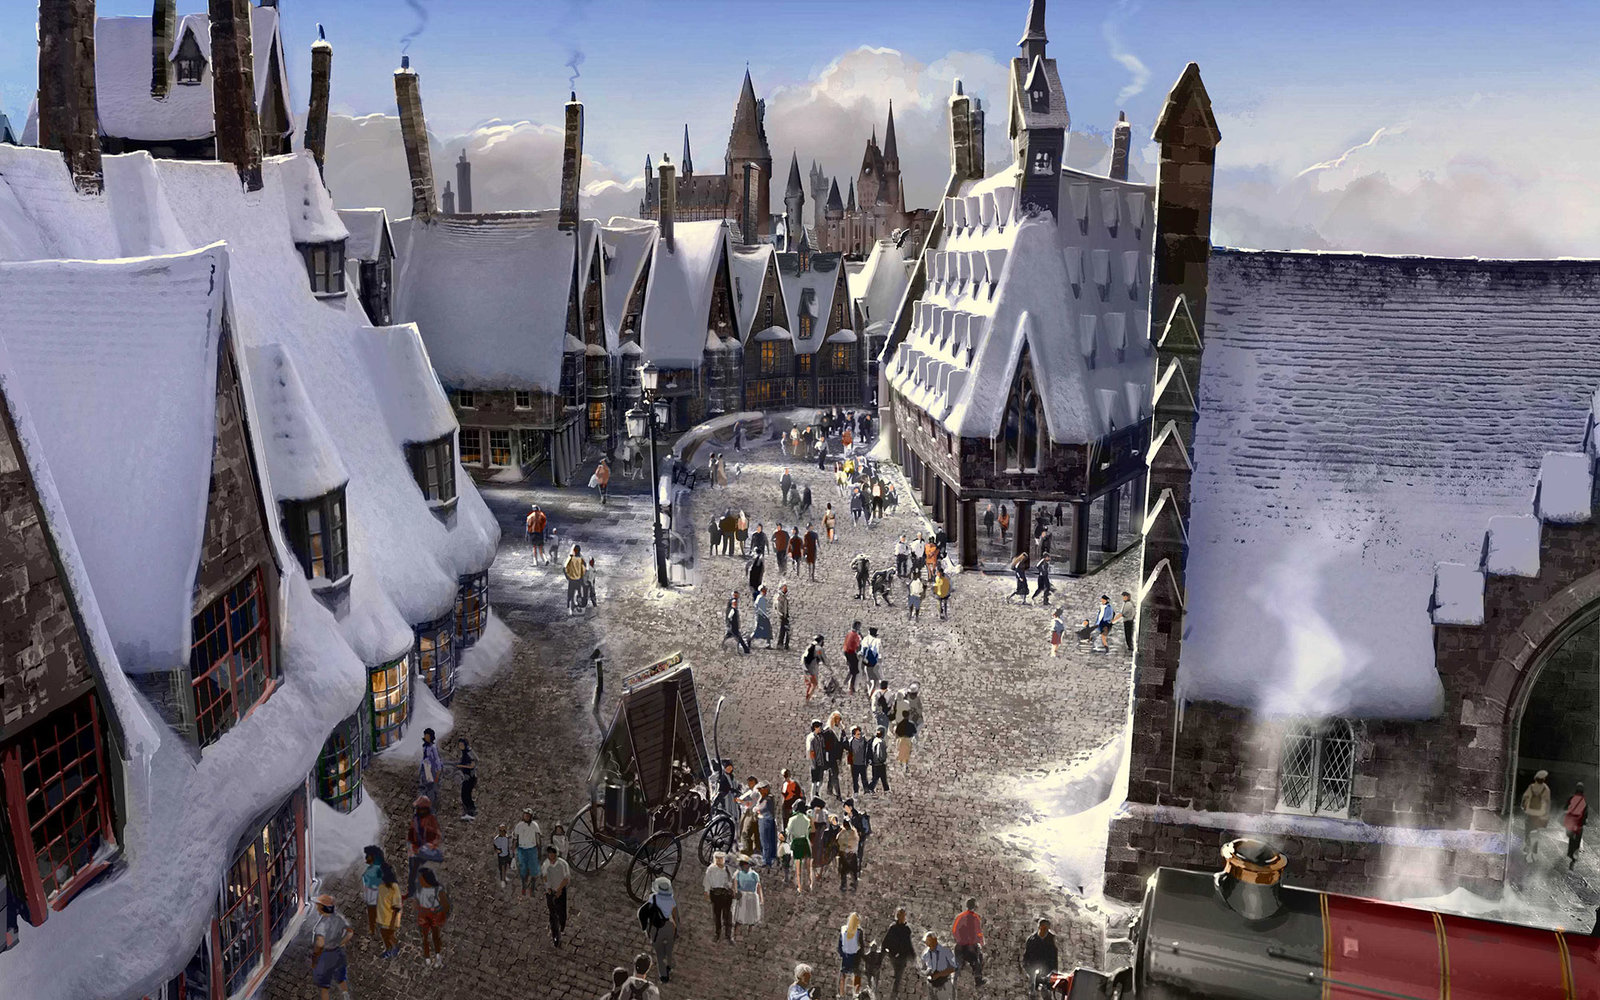 "The Wizarding World of Harry Potter" at Universal Studios Hollywood - Hogsmeade Village concept rendering